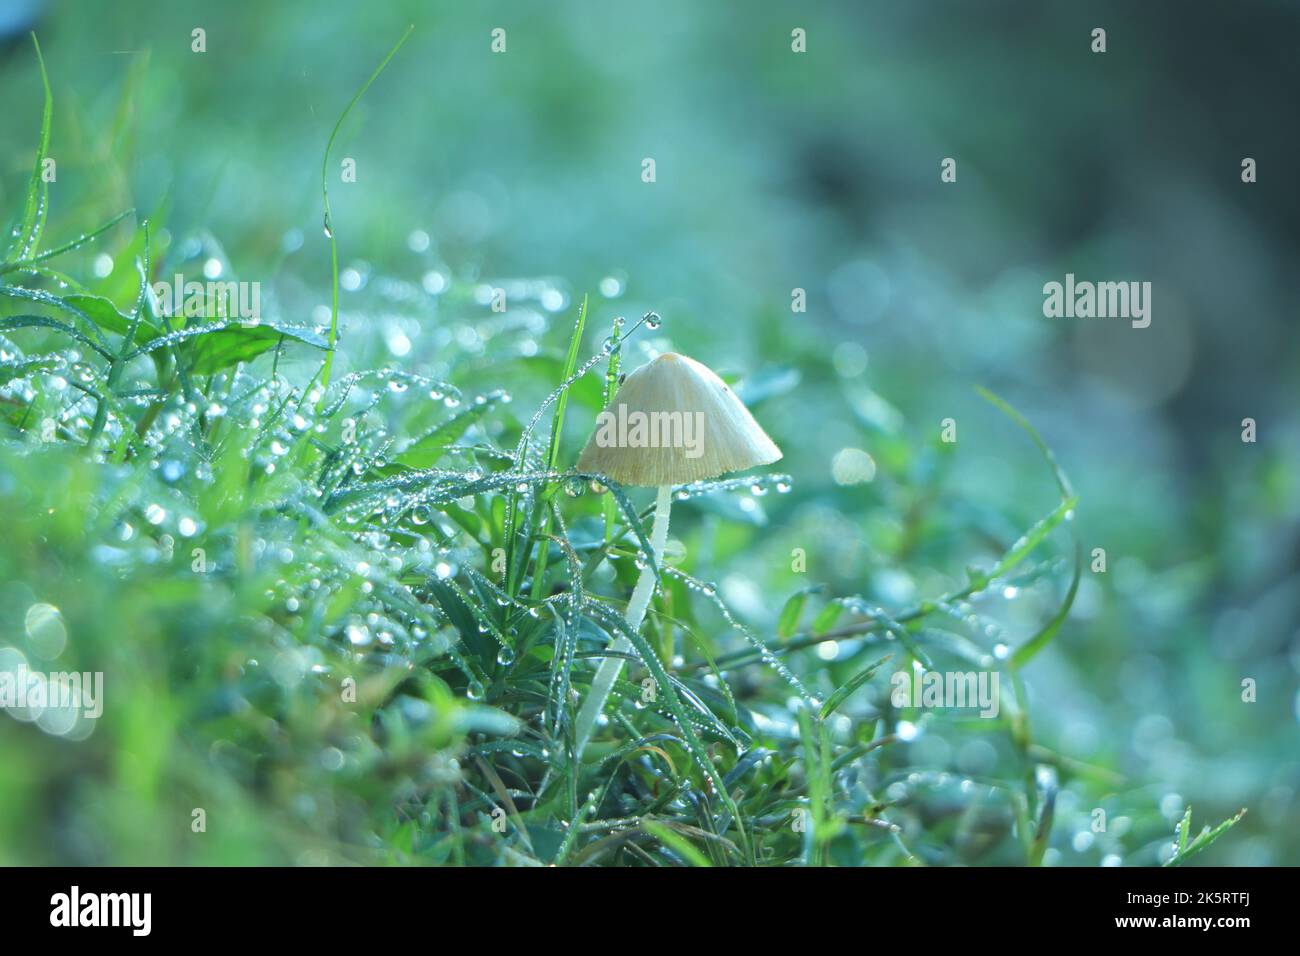 Beautiful horizontal closeup of a tiny mushroom growing on tee trunk with green moss and dark forest background. Stock Photo